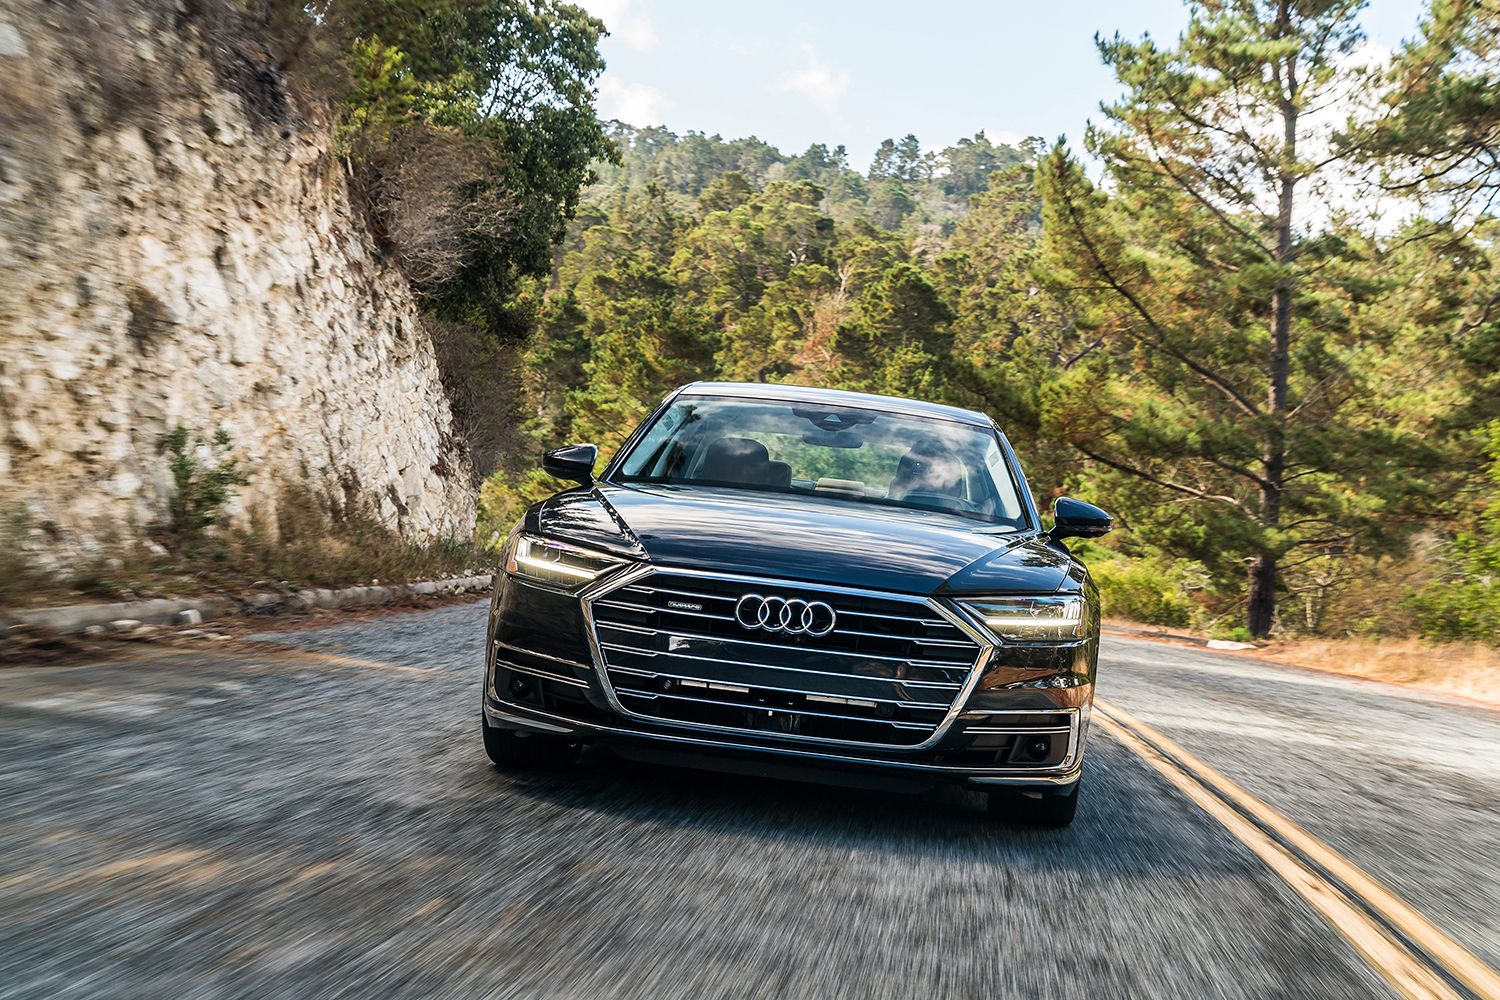 2019 Audi A8 first drive: The flagship goes even higher tech